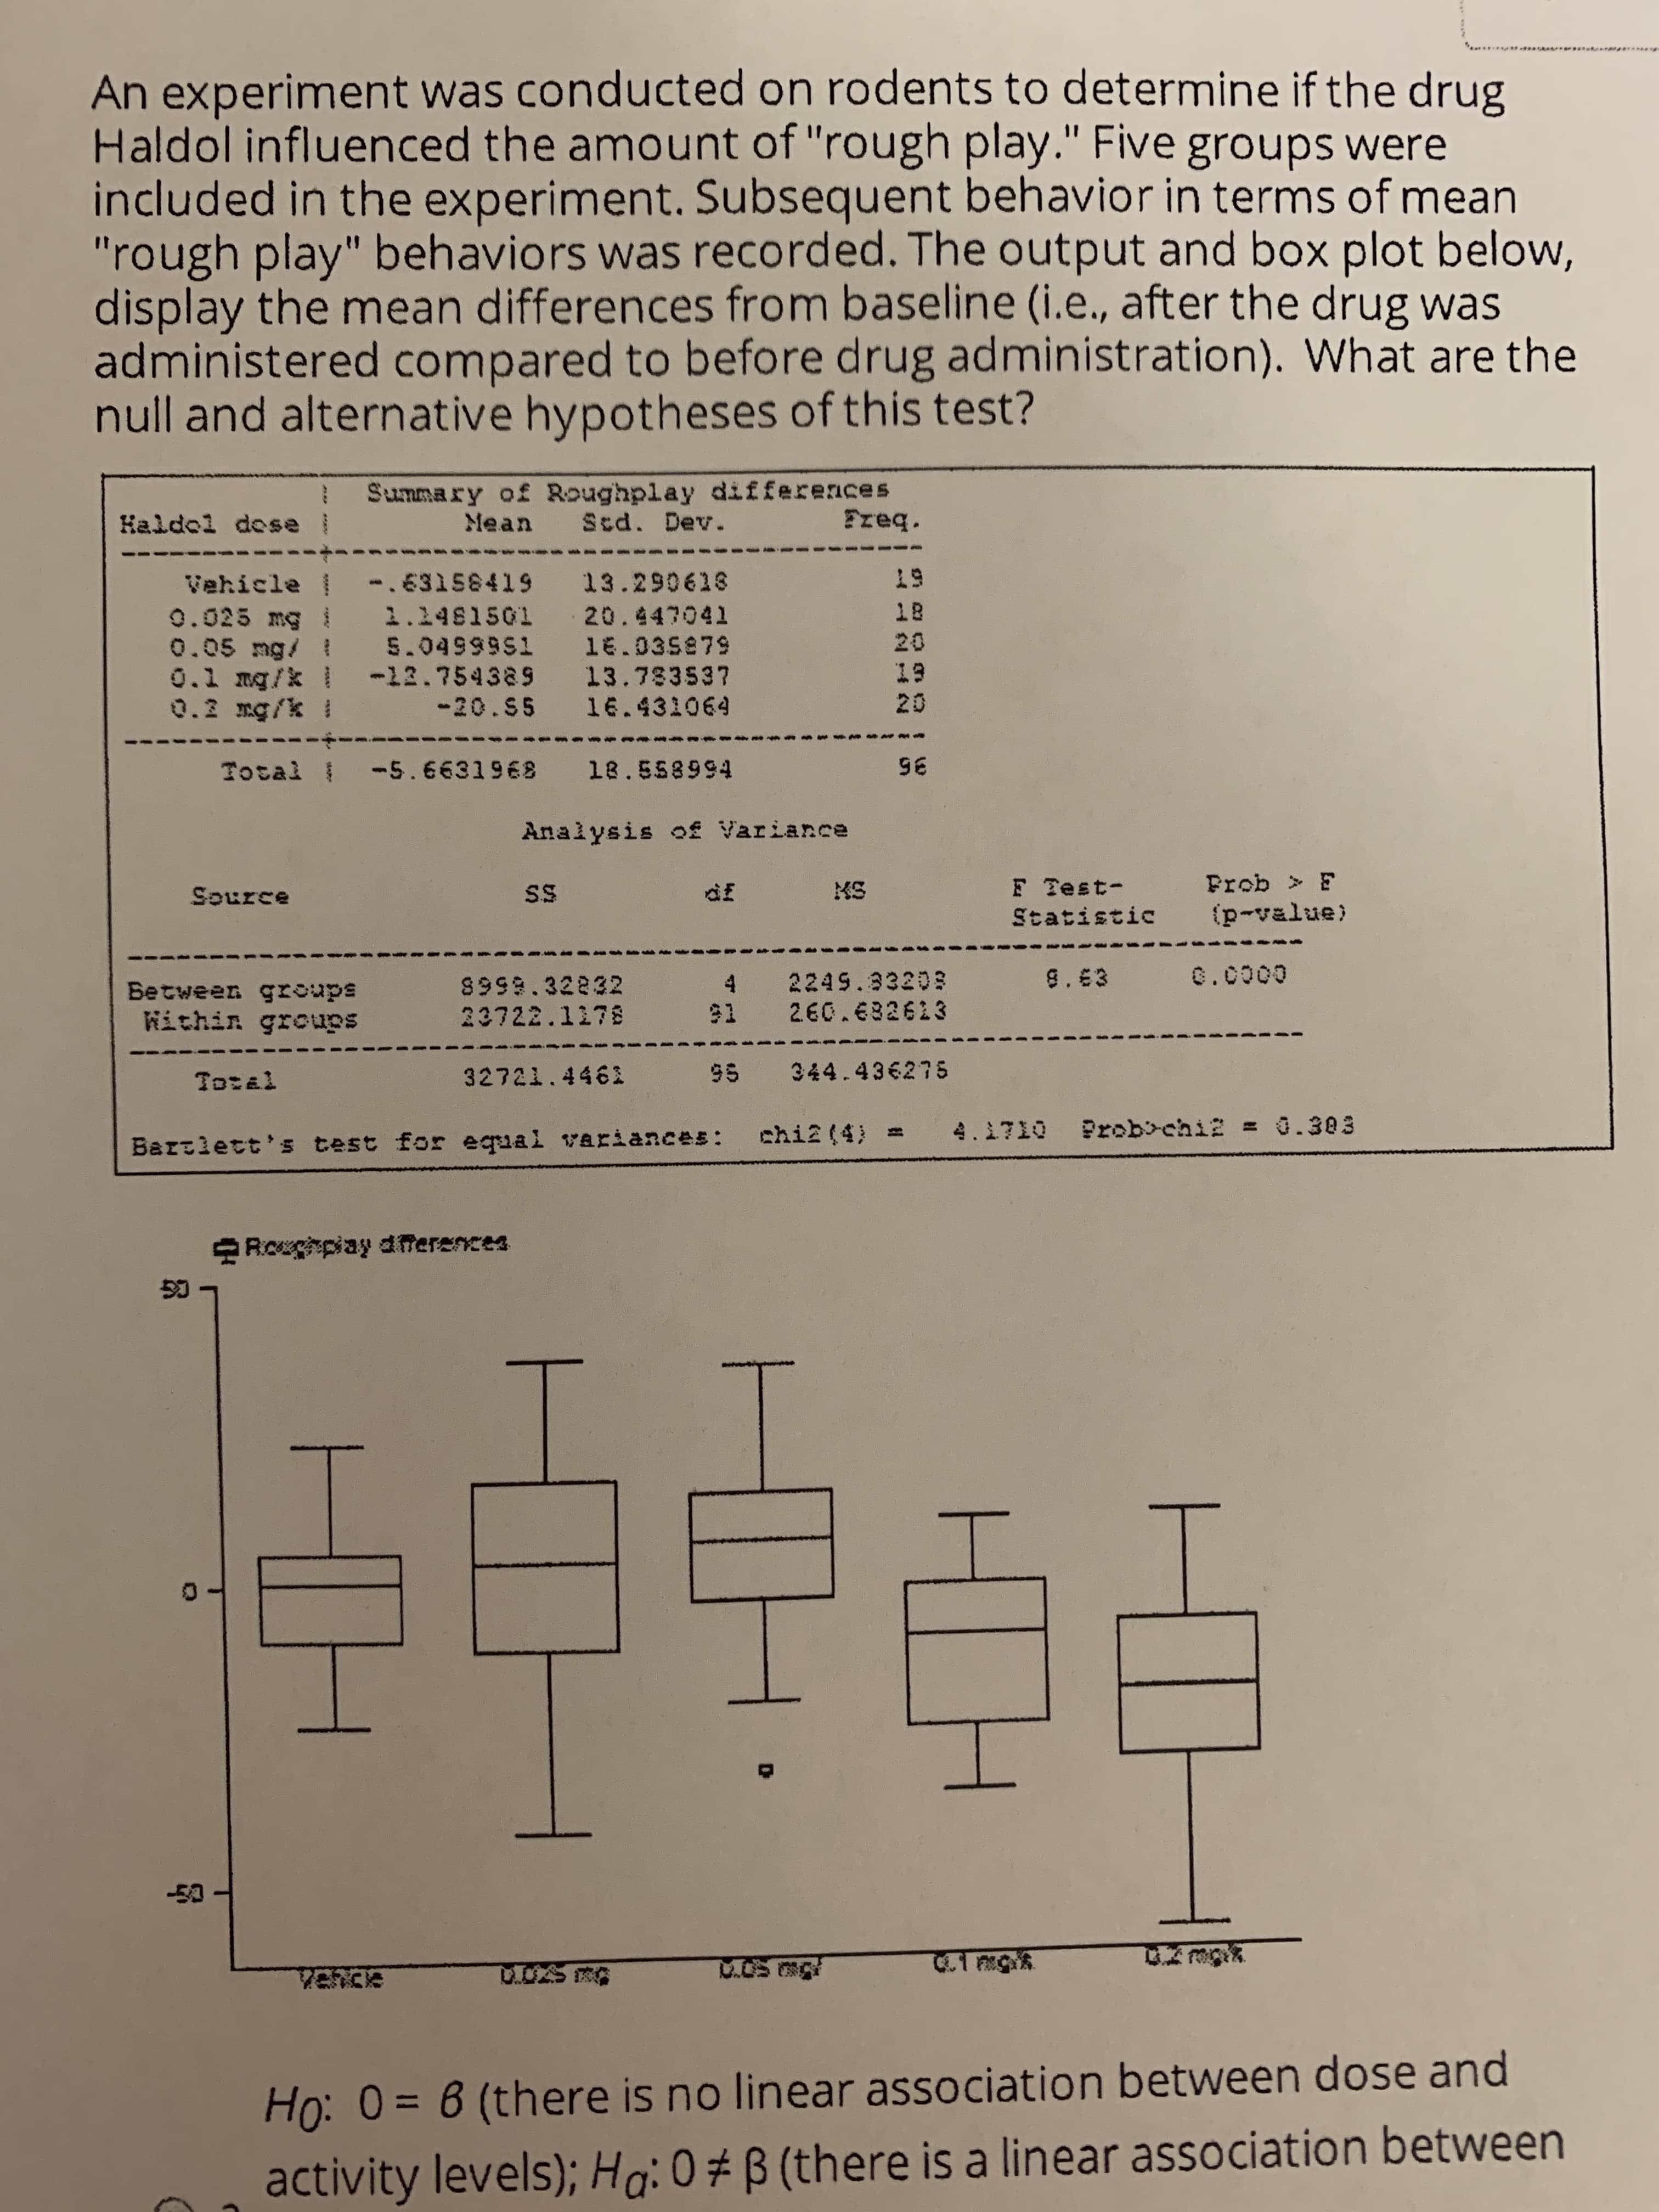 An experiment was conducted on rodents to determine if the drug
Haldol influenced the amount of "rough play." Five groups were
included in the experiment. Subsequent behavior in terms of mean
"rough play" behaviors was recorded. The output and box plot below,
display the mean differences from baseline (i.e., after the drug was
administered compared to before drug administration). What are the
null and alternative hypotheses of this test?
Summary of Roughplay differences
Scd. Dev.
Haldol dese
Mean
Freq.
-.63158419 13.290618
19
Vehicle |
0.025 mg i
0.05 mg/ 1
0.1 mg/k -12.754389 13.783537
0.2 mg/k I
18
1.1481501 20.447041
5.0499951 16.035879
20
19
-20.S5 16.431064
20
Total -5.6631968 1B.558994
96
Analysis of Variance
Frob F
(p-value)
Source
SS
df
KS
F Test-
Statistic
8999.32832
4 2249.33203
9.63
0.0000
Between groups
Within groups
91 260.682623
23722.1178
Tozal
32721.4461
95 344.436275
chif (4)
4.1710 Prob>chiz = 0.303
=
Bartlett's test for equal variances:
Roeghpiay diferences
-50
Ho: 0 = 6 (there is no linear association between dose and
%3D
activity levels); Ho: 0 # B (there is a linear association between
